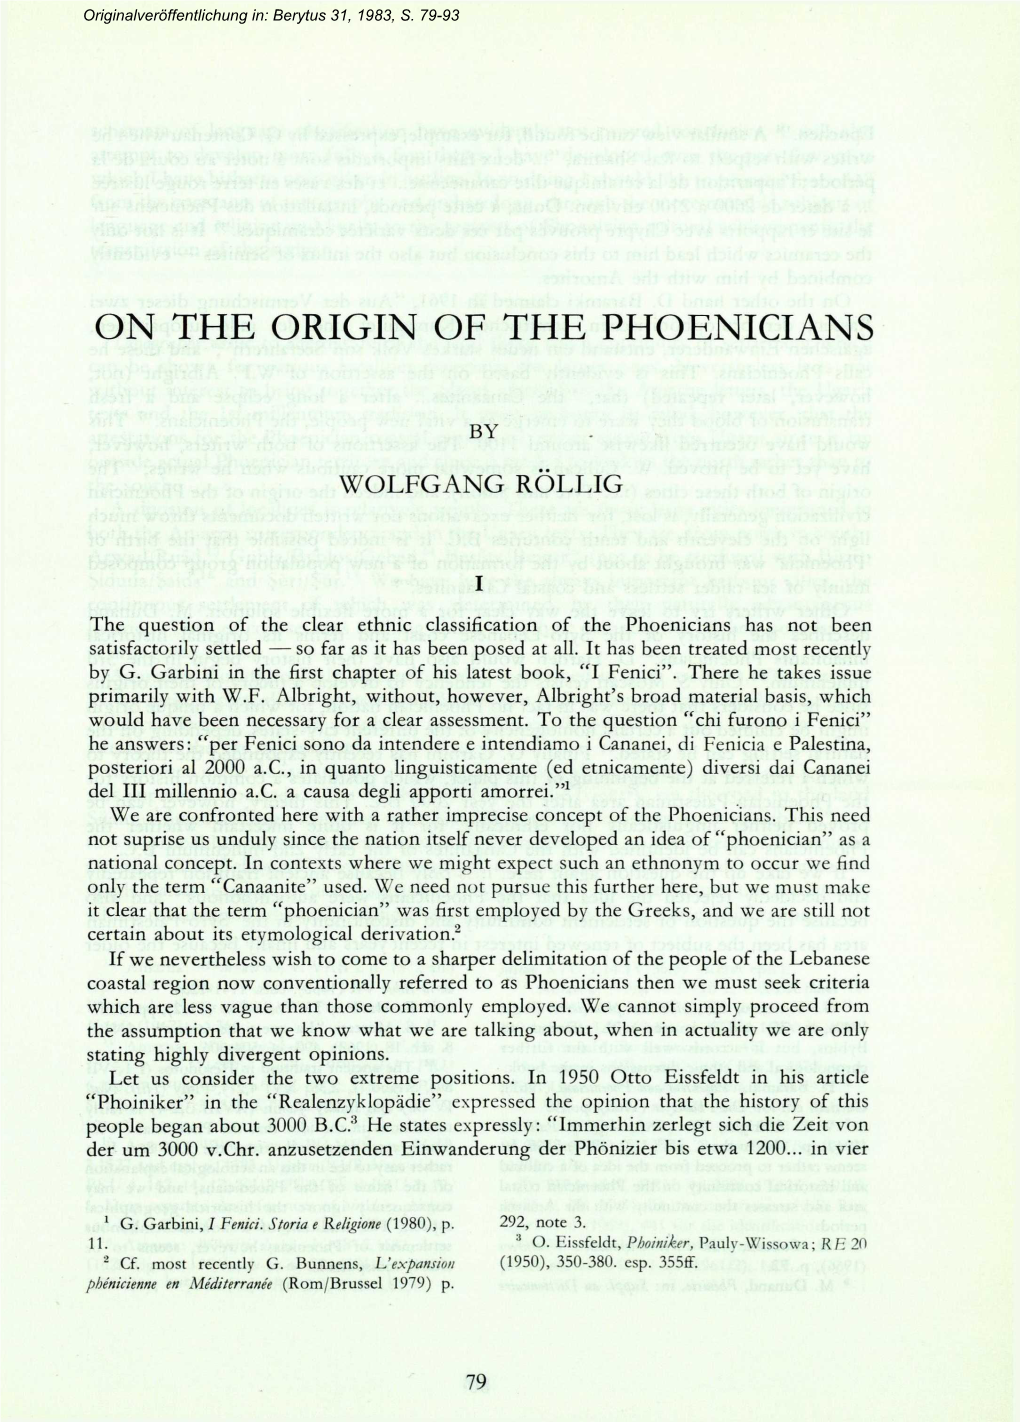 On the Origin of the Phoenicians